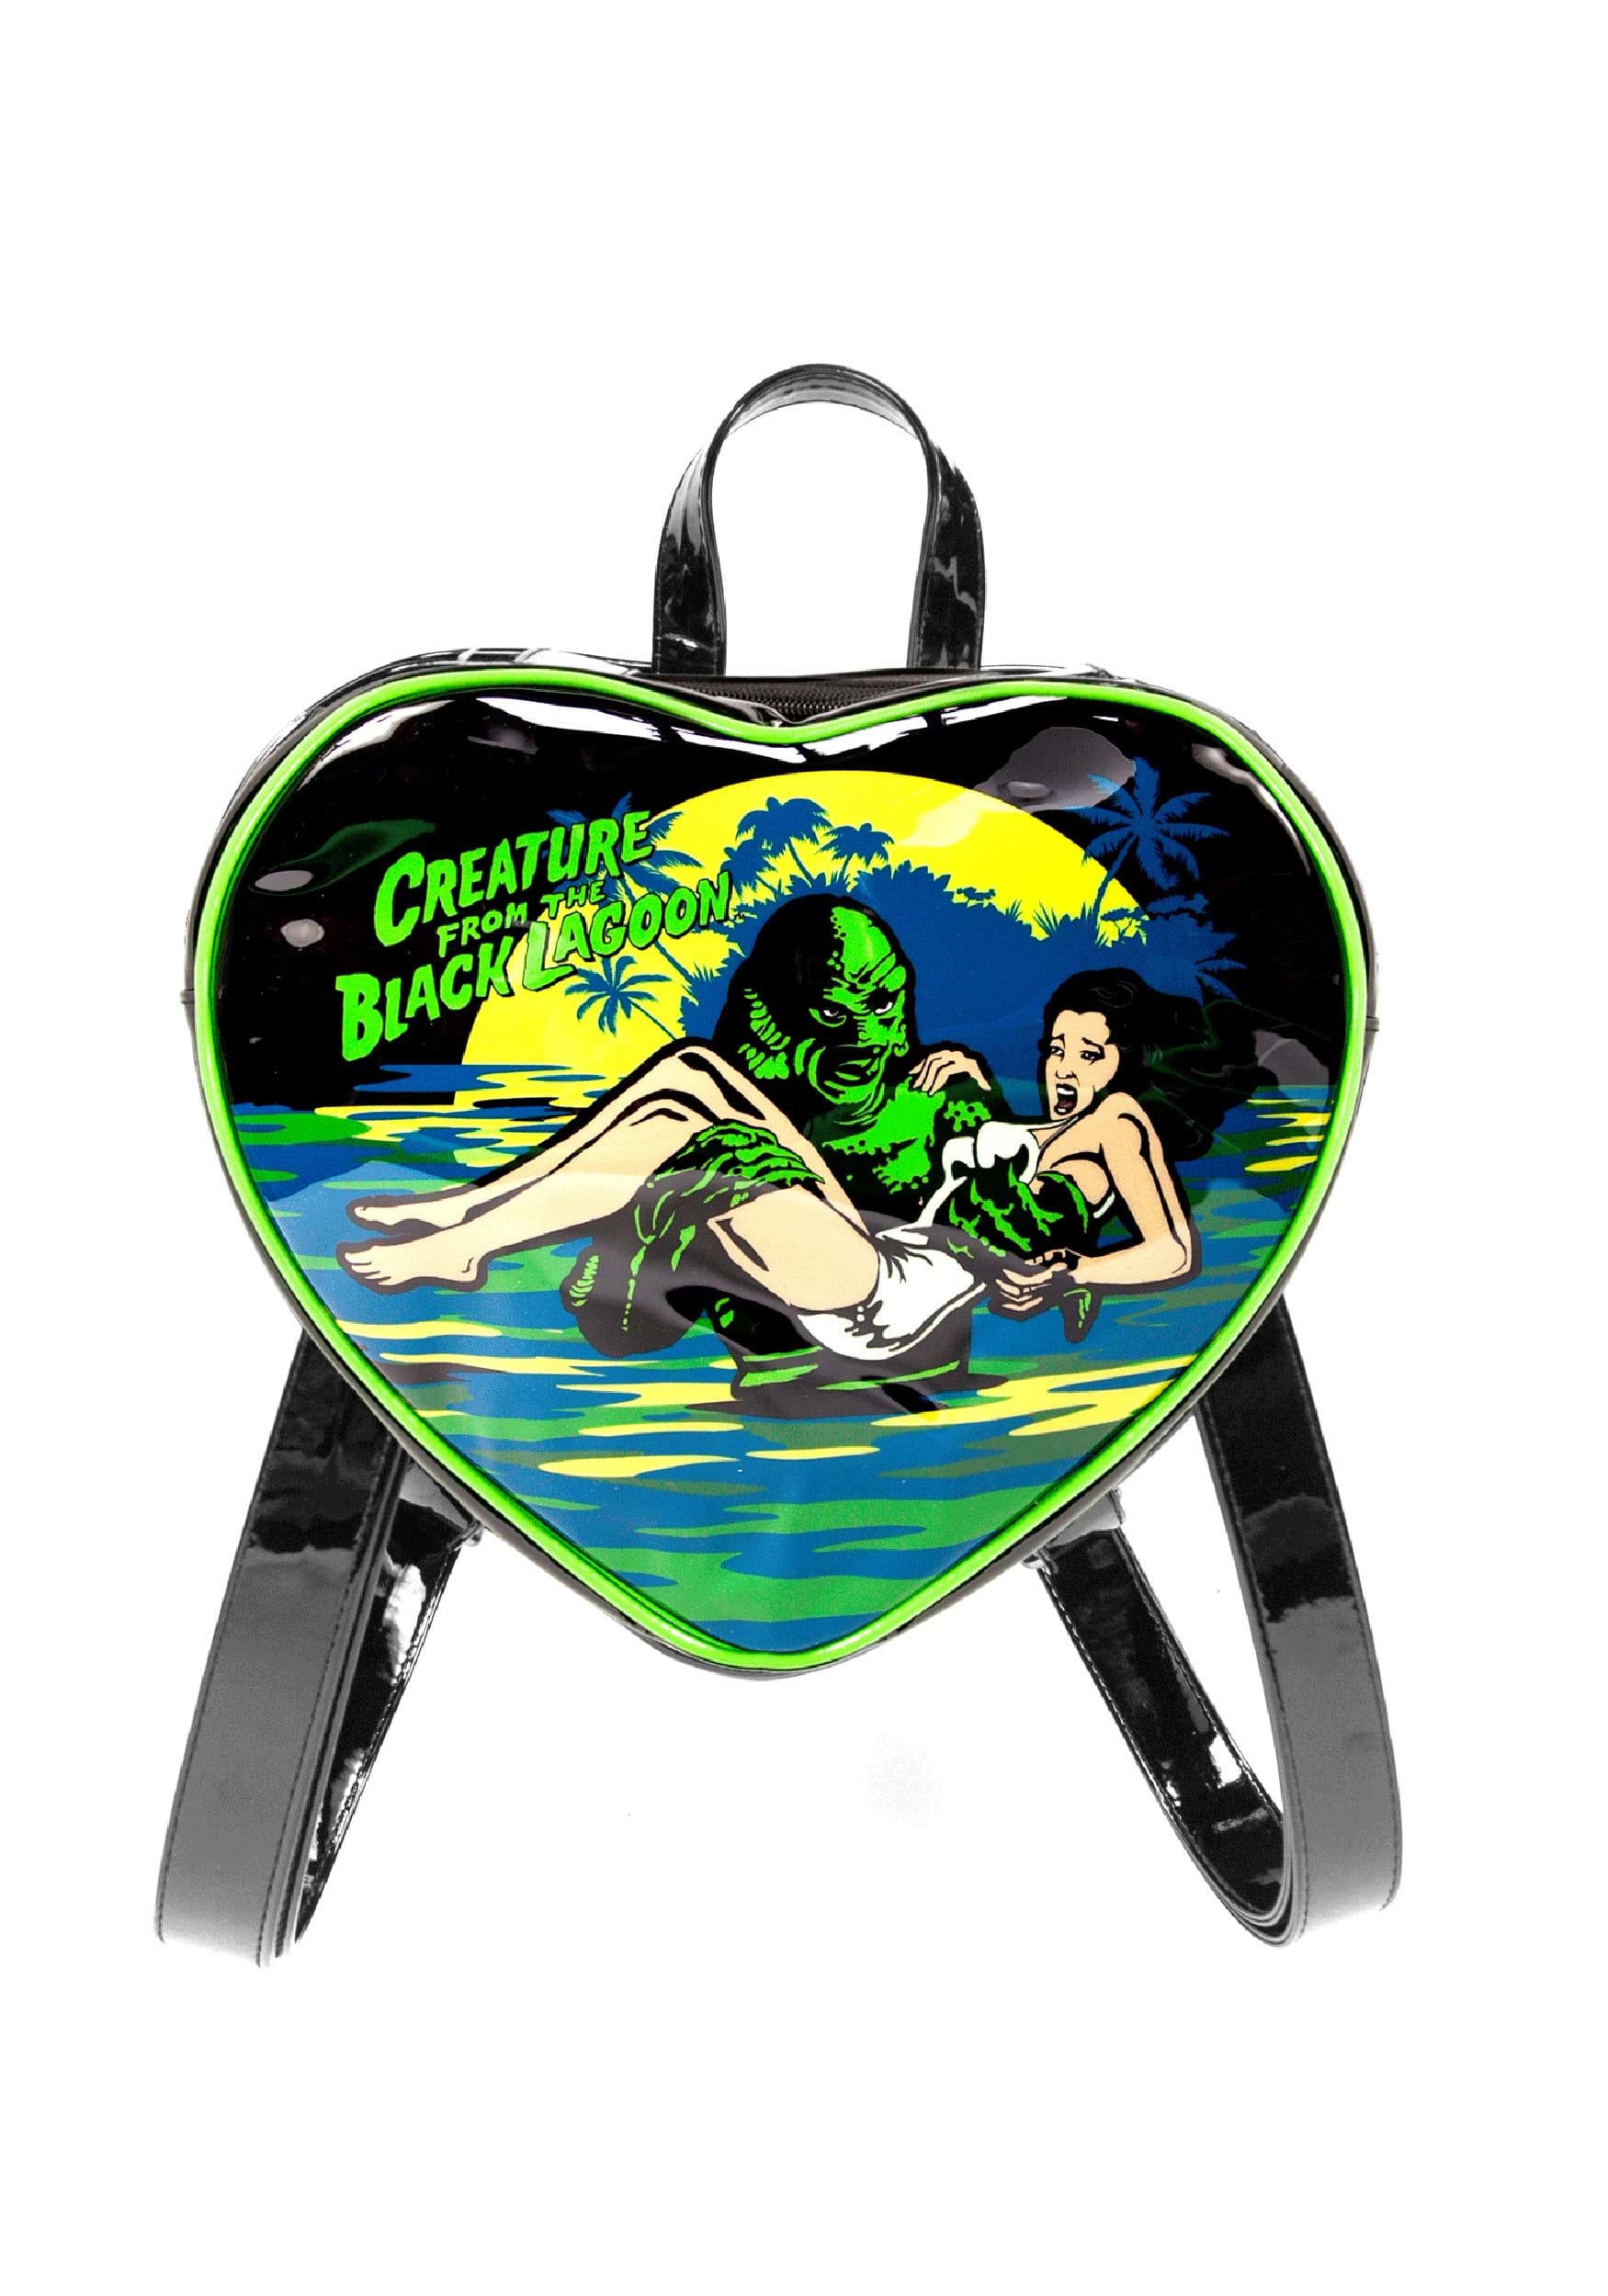 Image of Creature From The Black Lagoon Heart-Shaped Backpack ID RRUMHB82CREATDAMSEL-ST